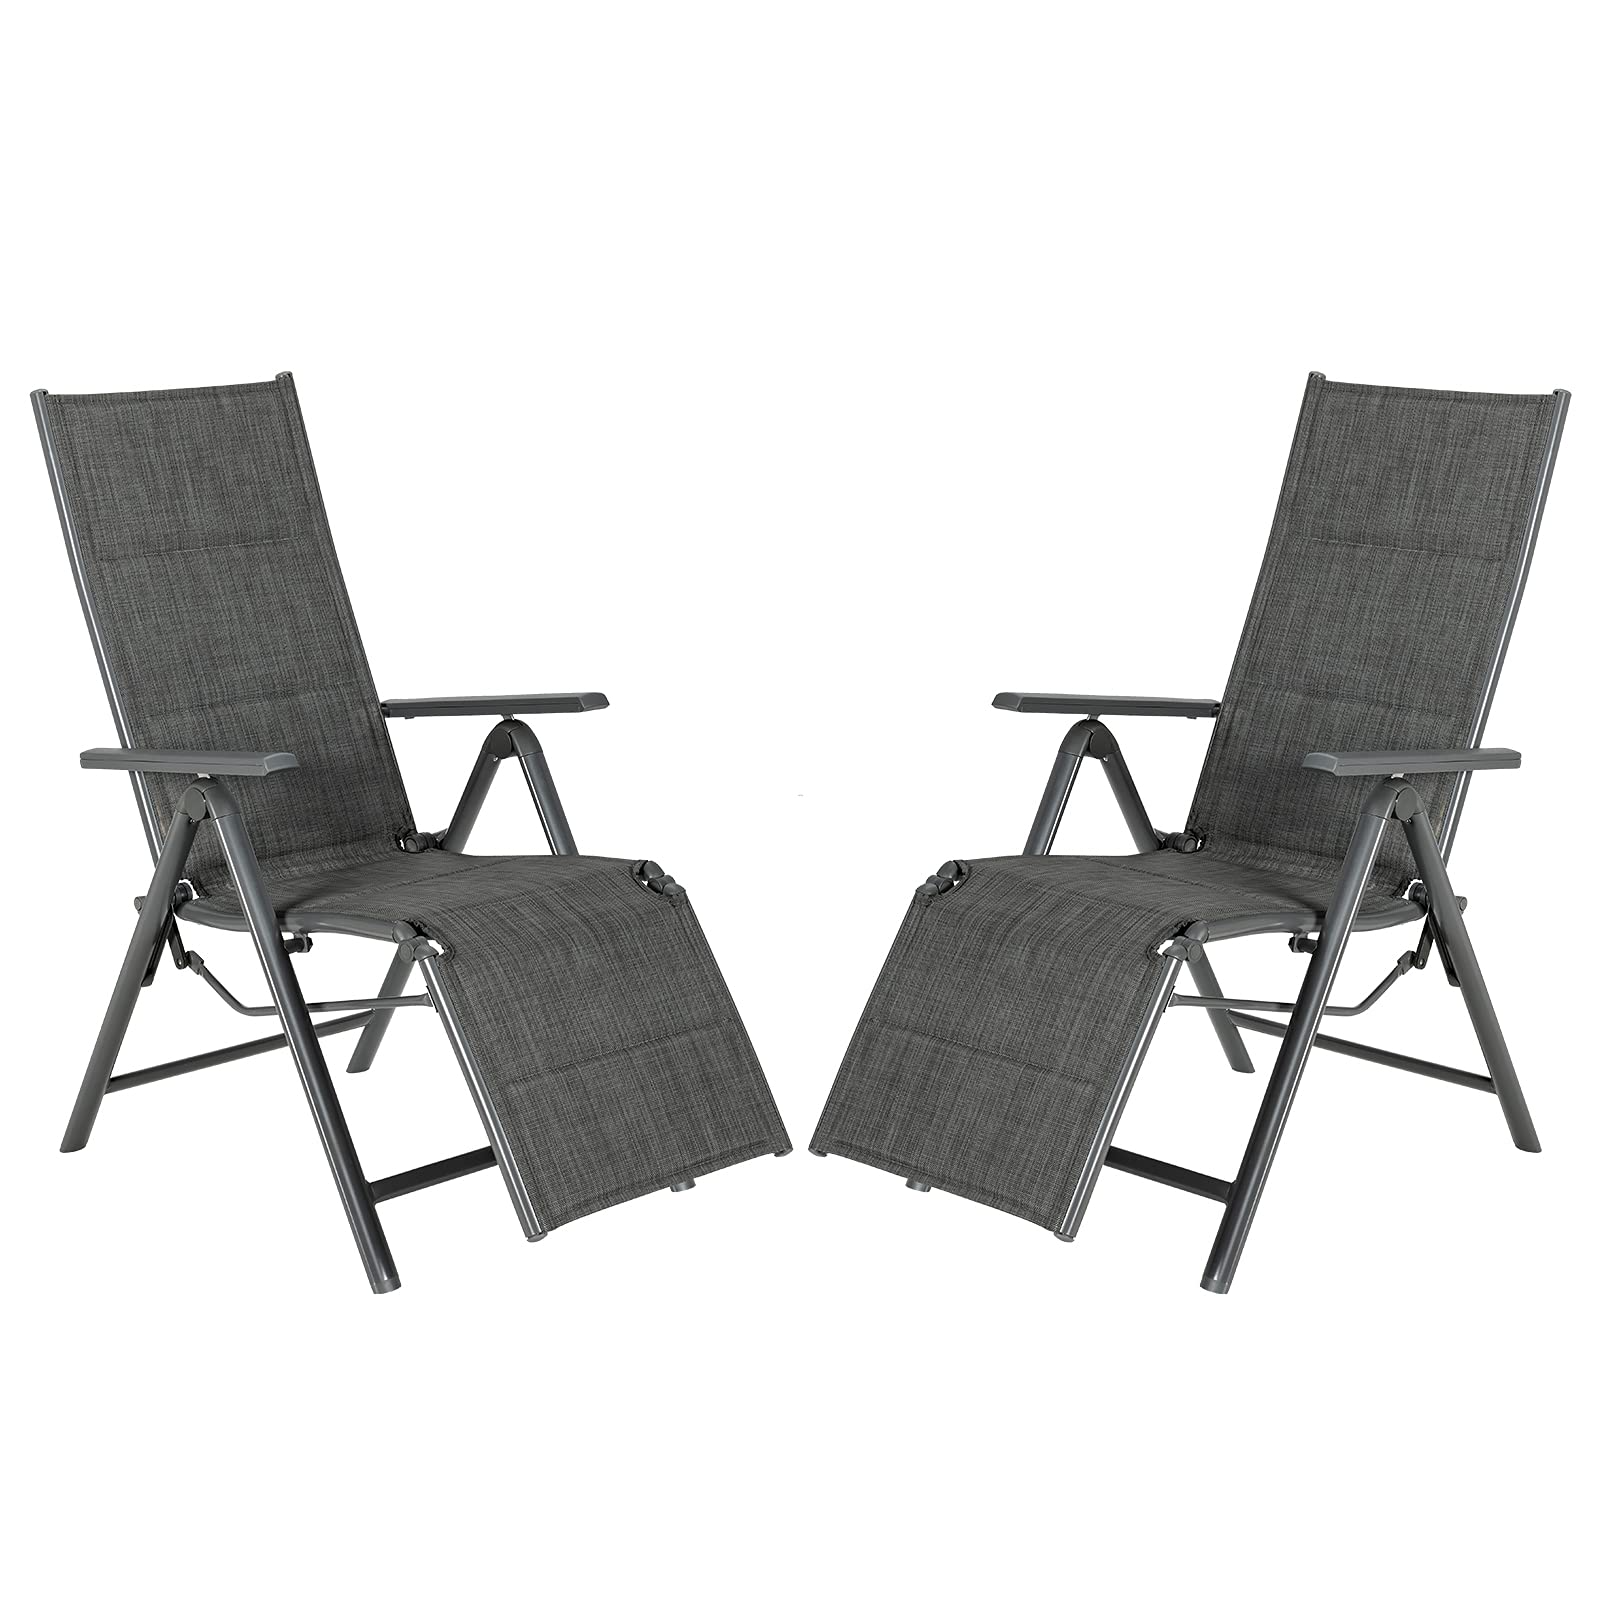 Giantex Reclining Patio Chairs 7 Positions Adjustable Backrest Outdoor Folding Recliners Aluminum Frame Padded Lounge Chair Lawn Porch Furniture